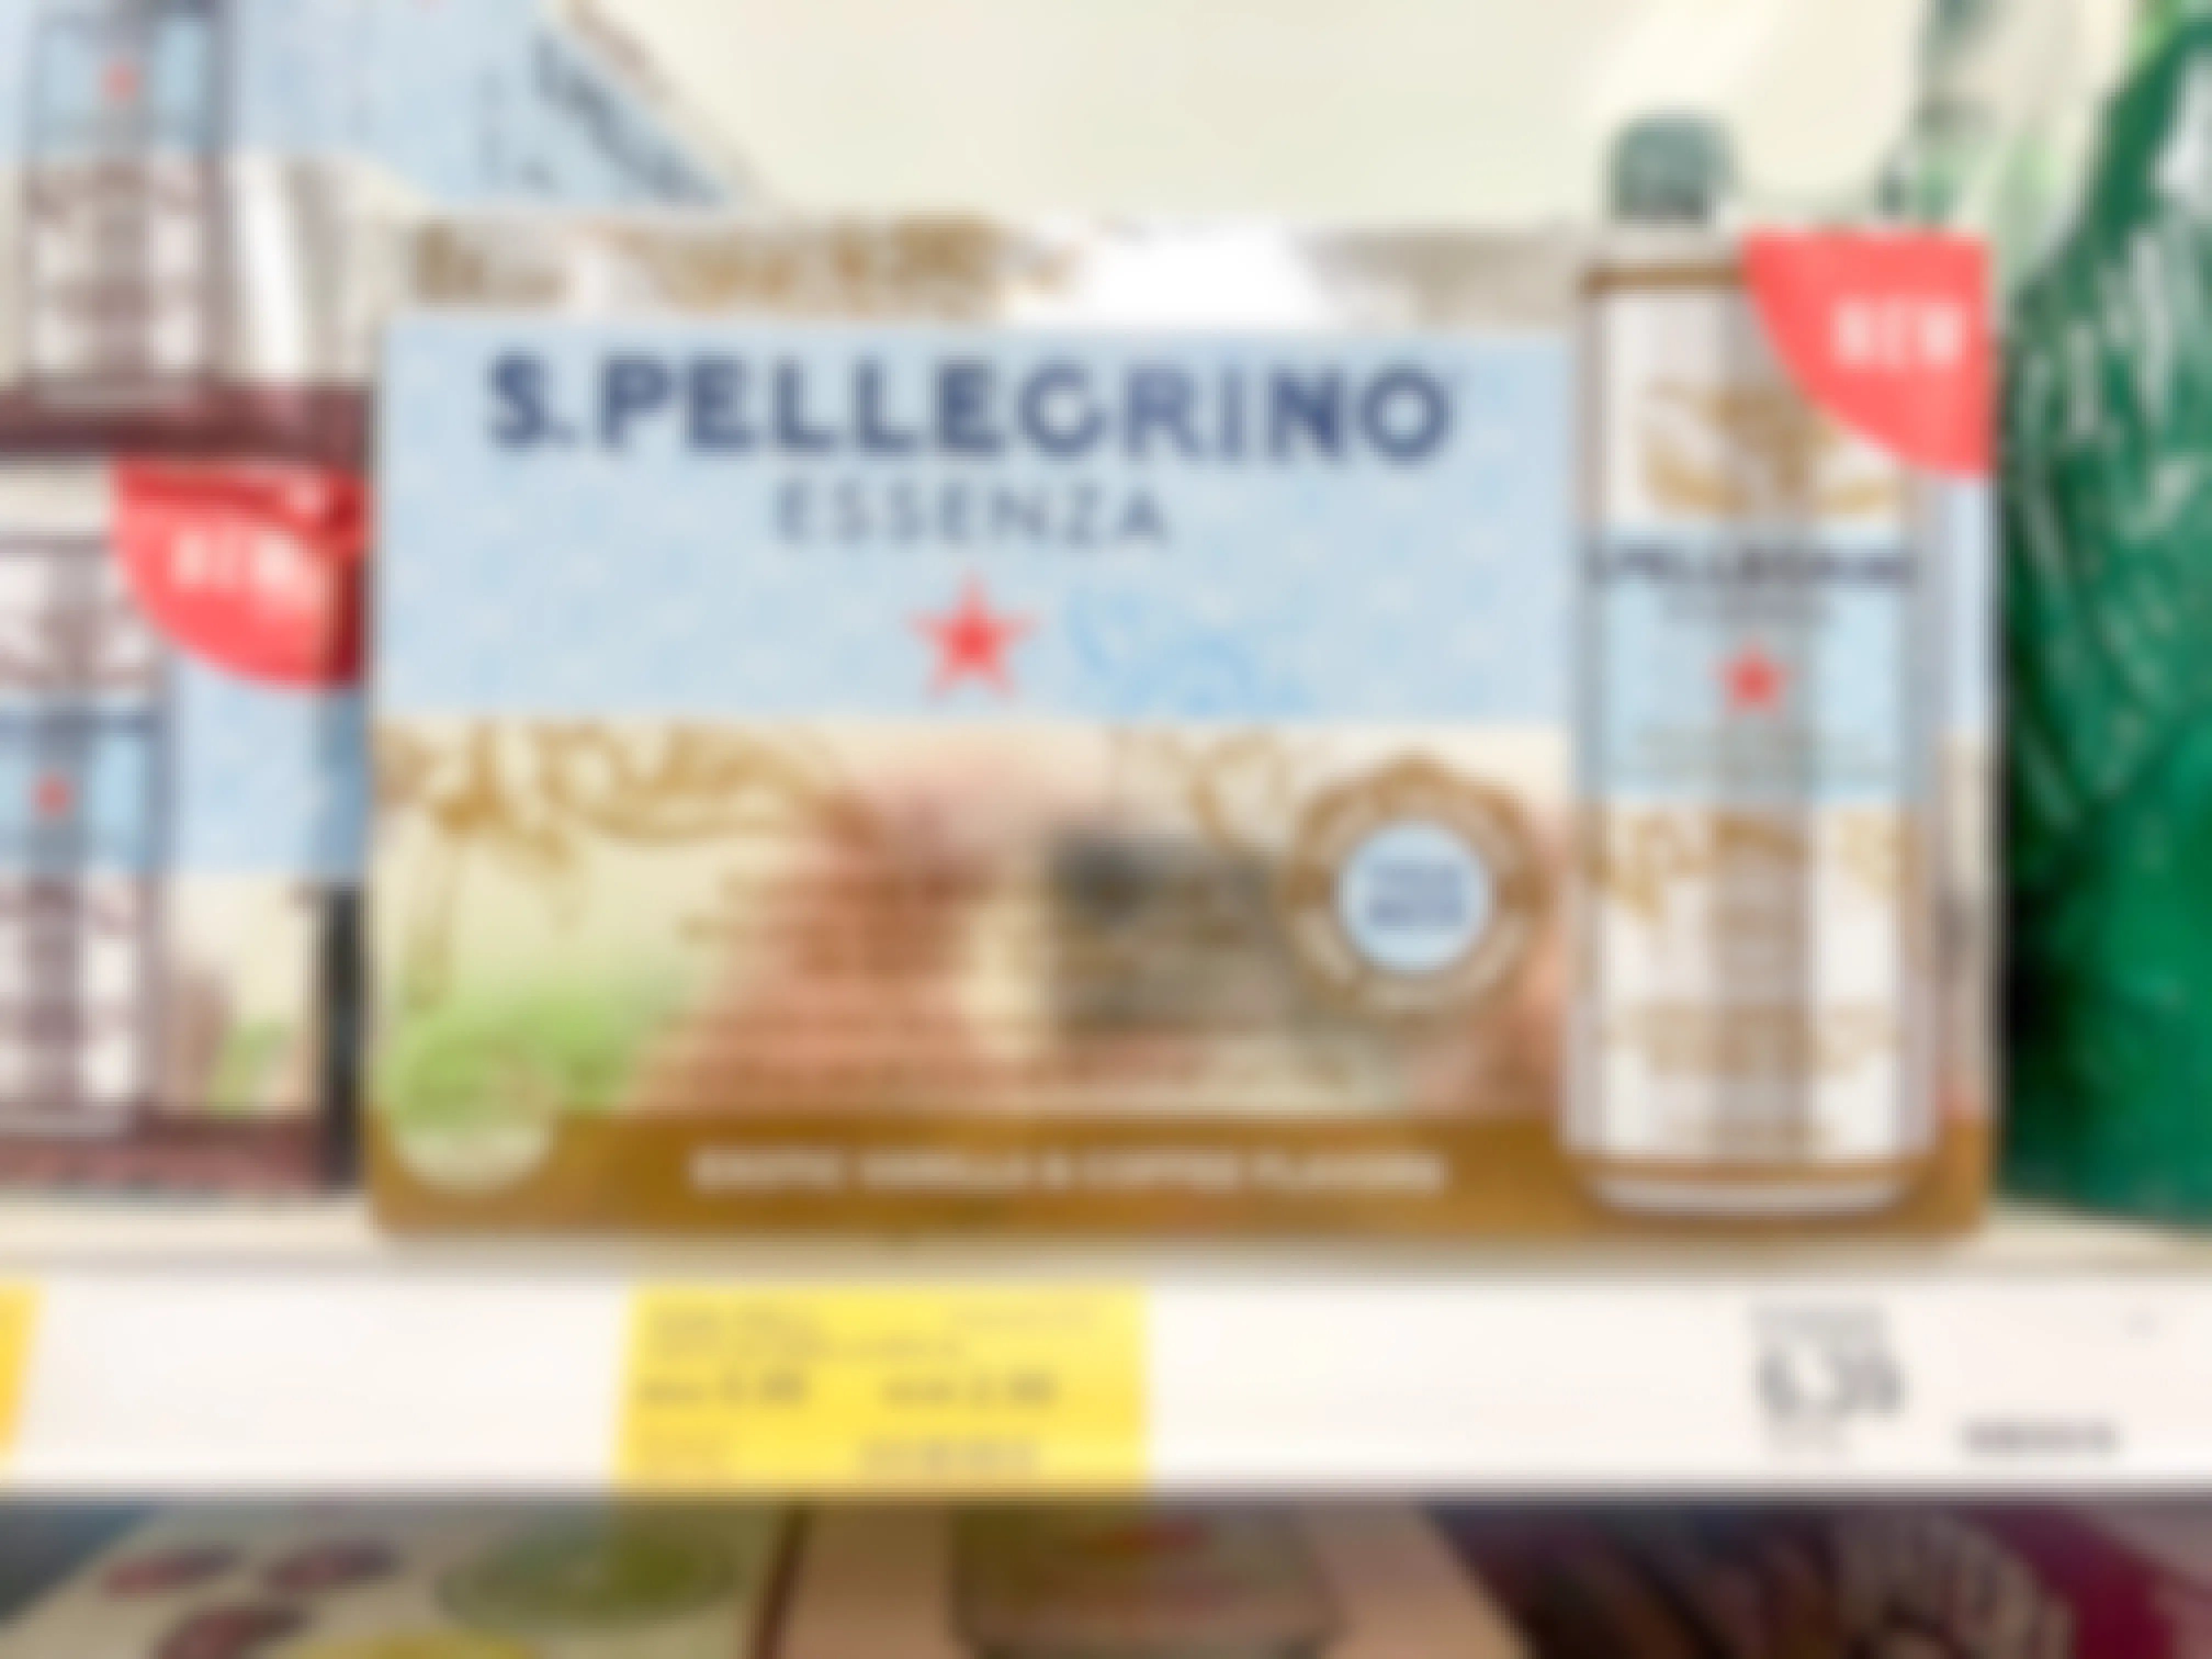 A box of San Pellegrino mineral water on a shelf at Target.